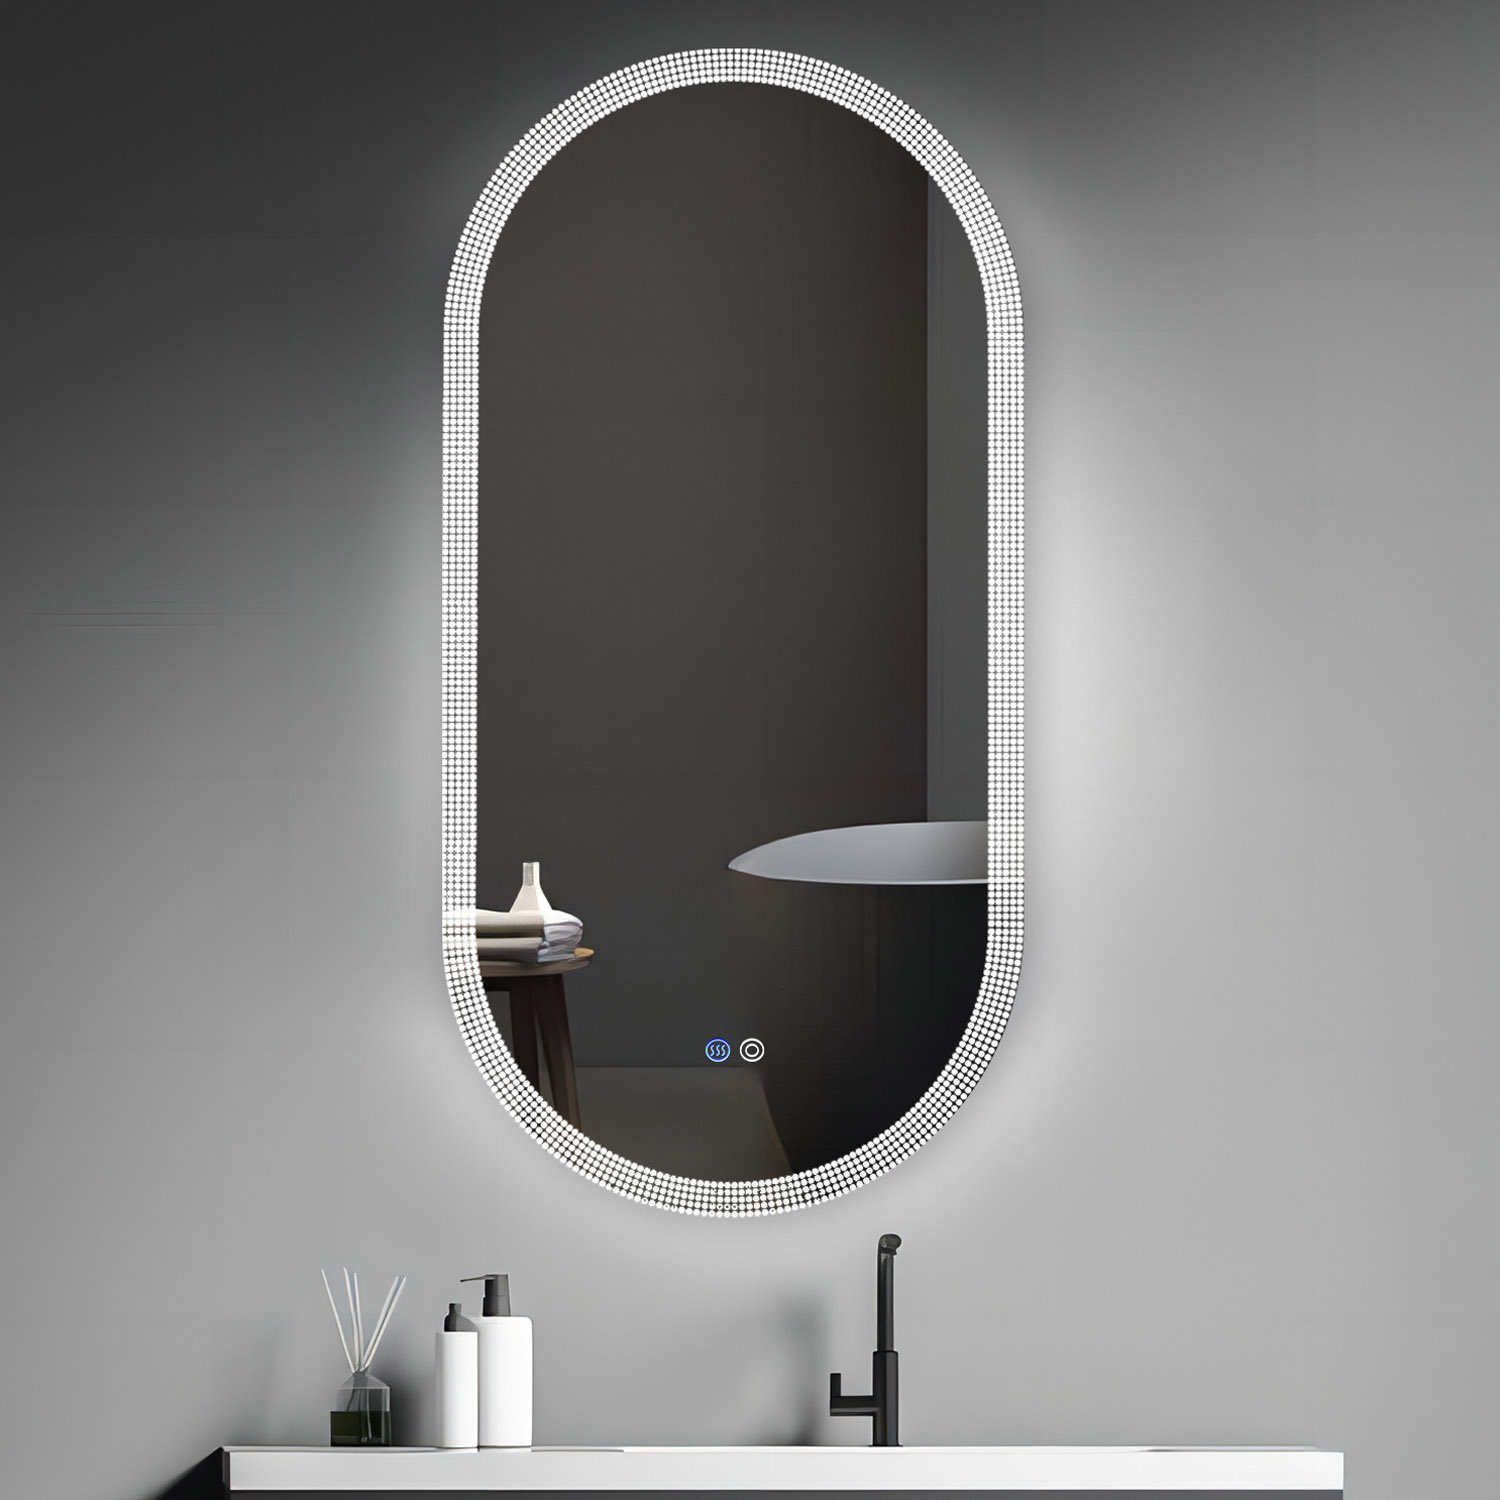 Large Colorprint Mirror from Eglomisé – The Bowdoin Store